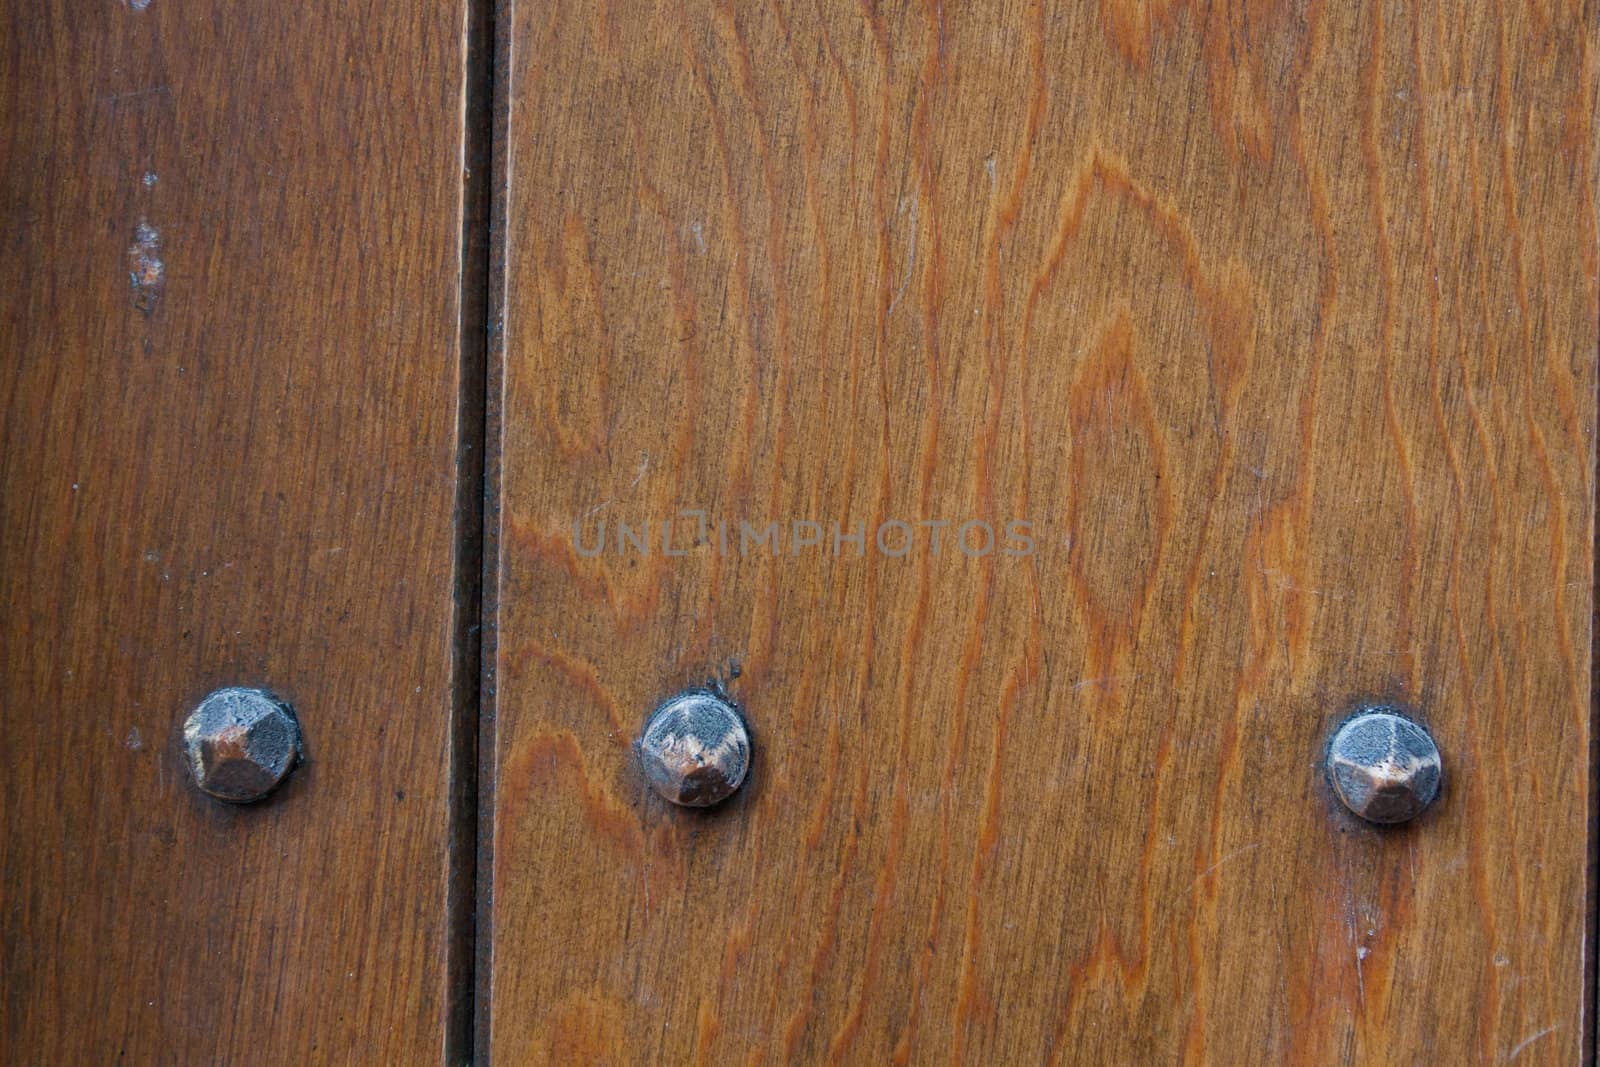 Metal pieces mounted to wood are photographed in a way to make an abstract texture background image from the materials.